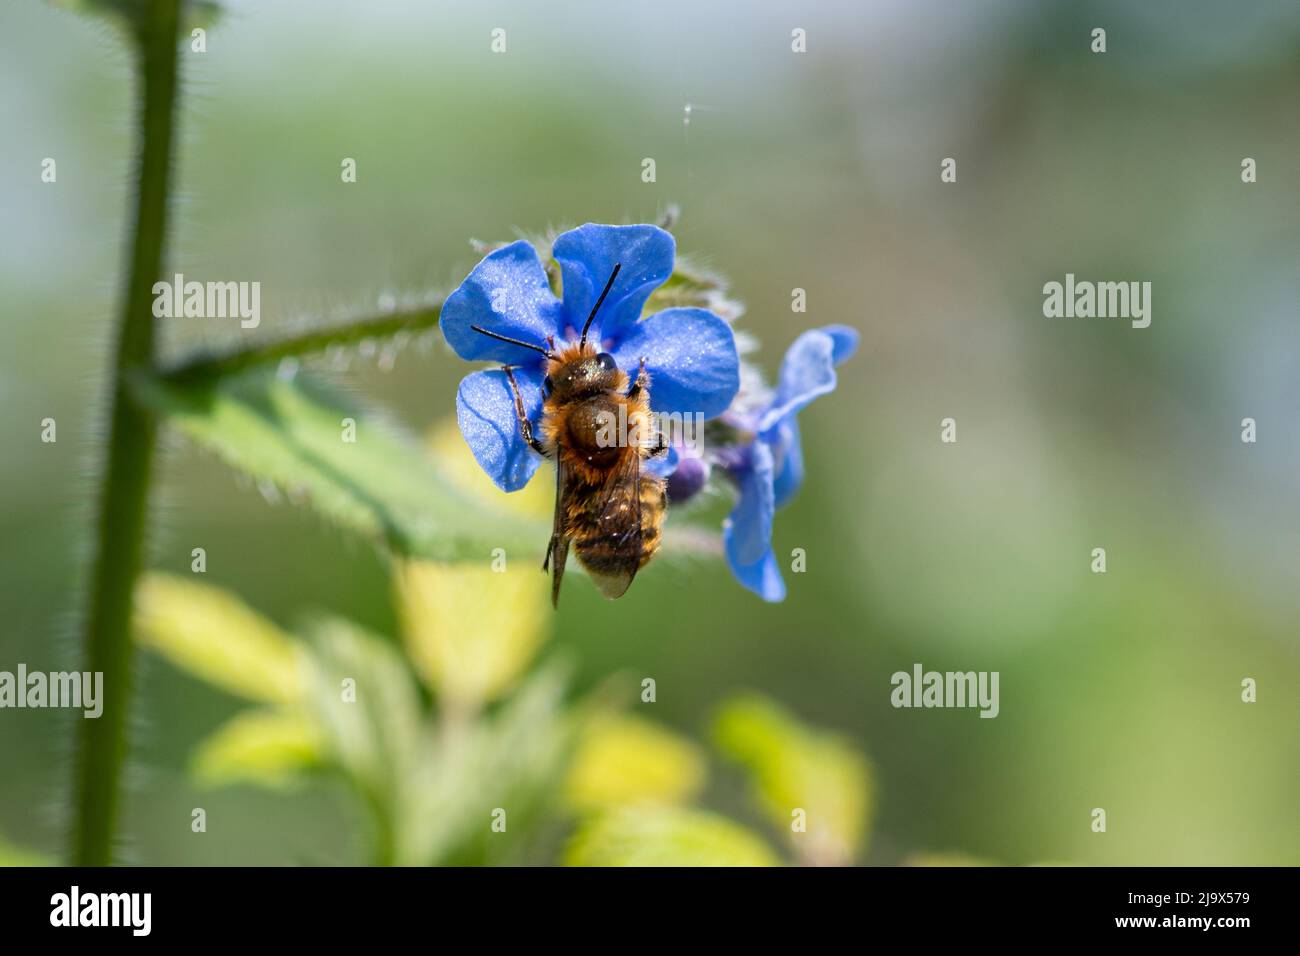 A bee feeding on nectar on a green alkanet (Pentaglottis sempervirens, a blue wildflower), during May, England, UK Stock Photo